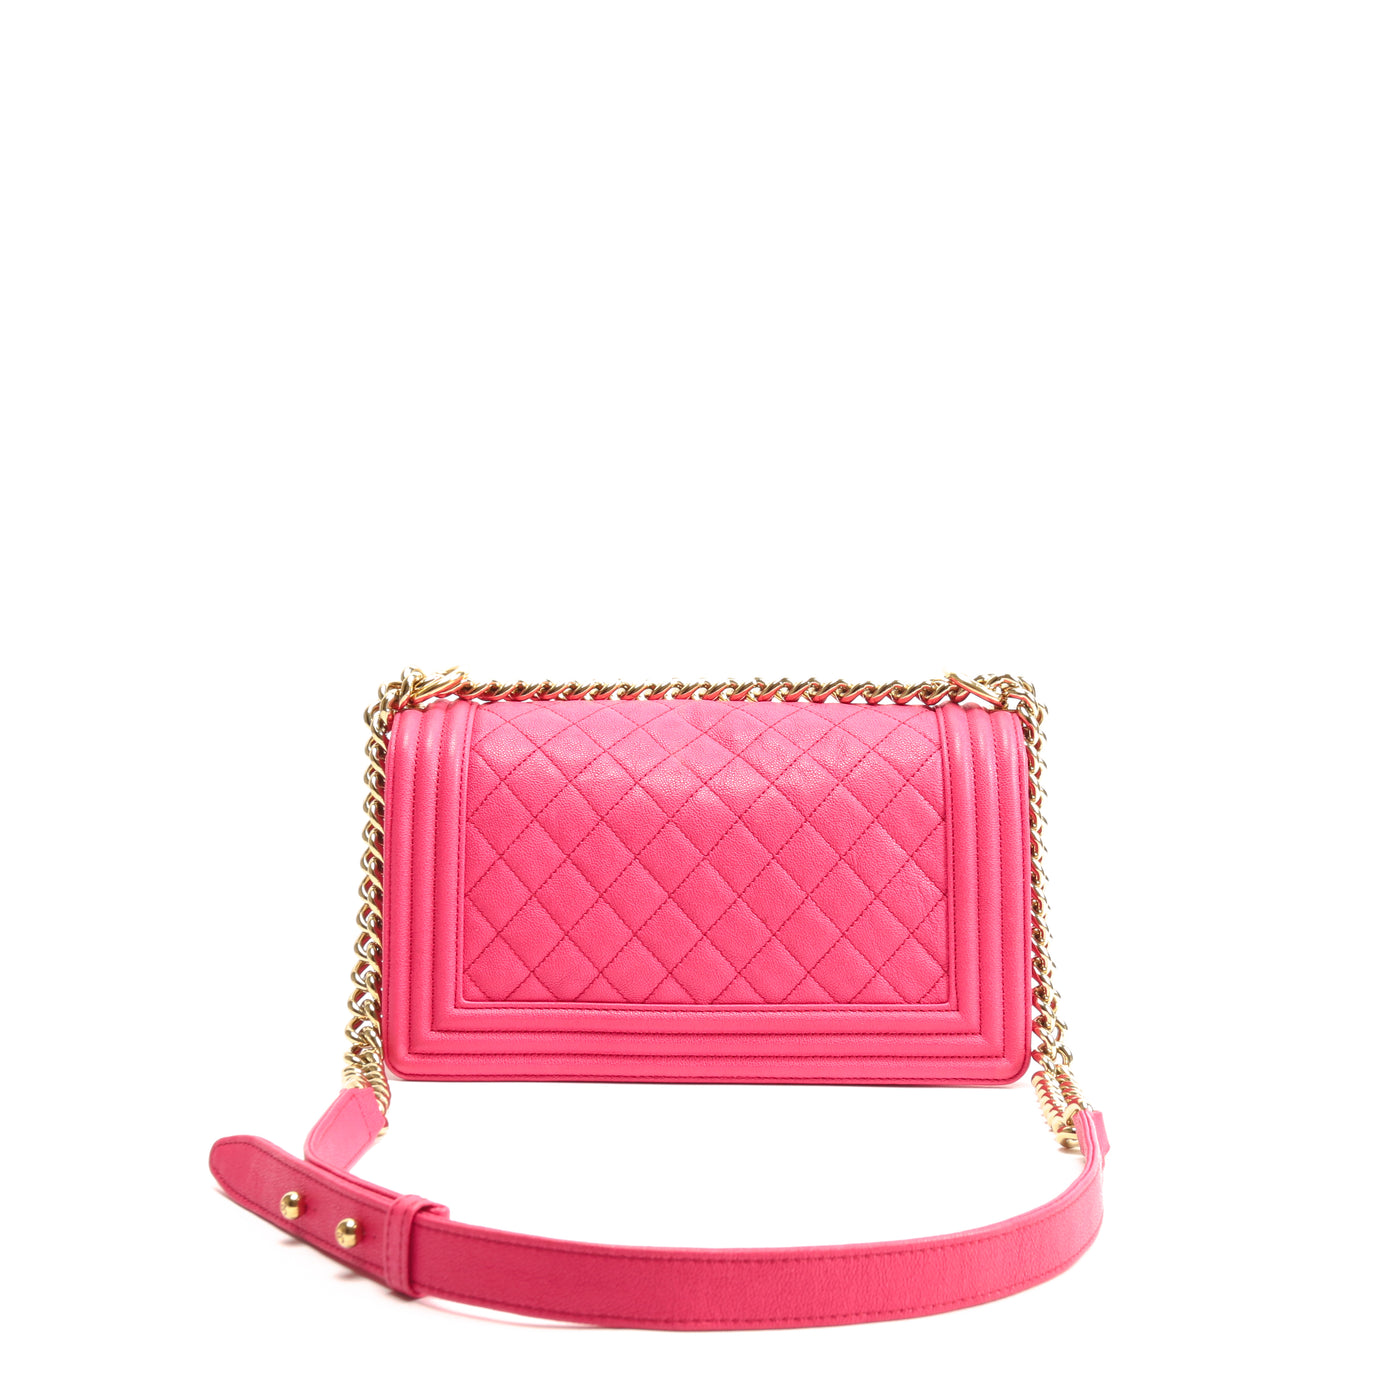 CHANEL Medium Quilted Boy Bag - Pink